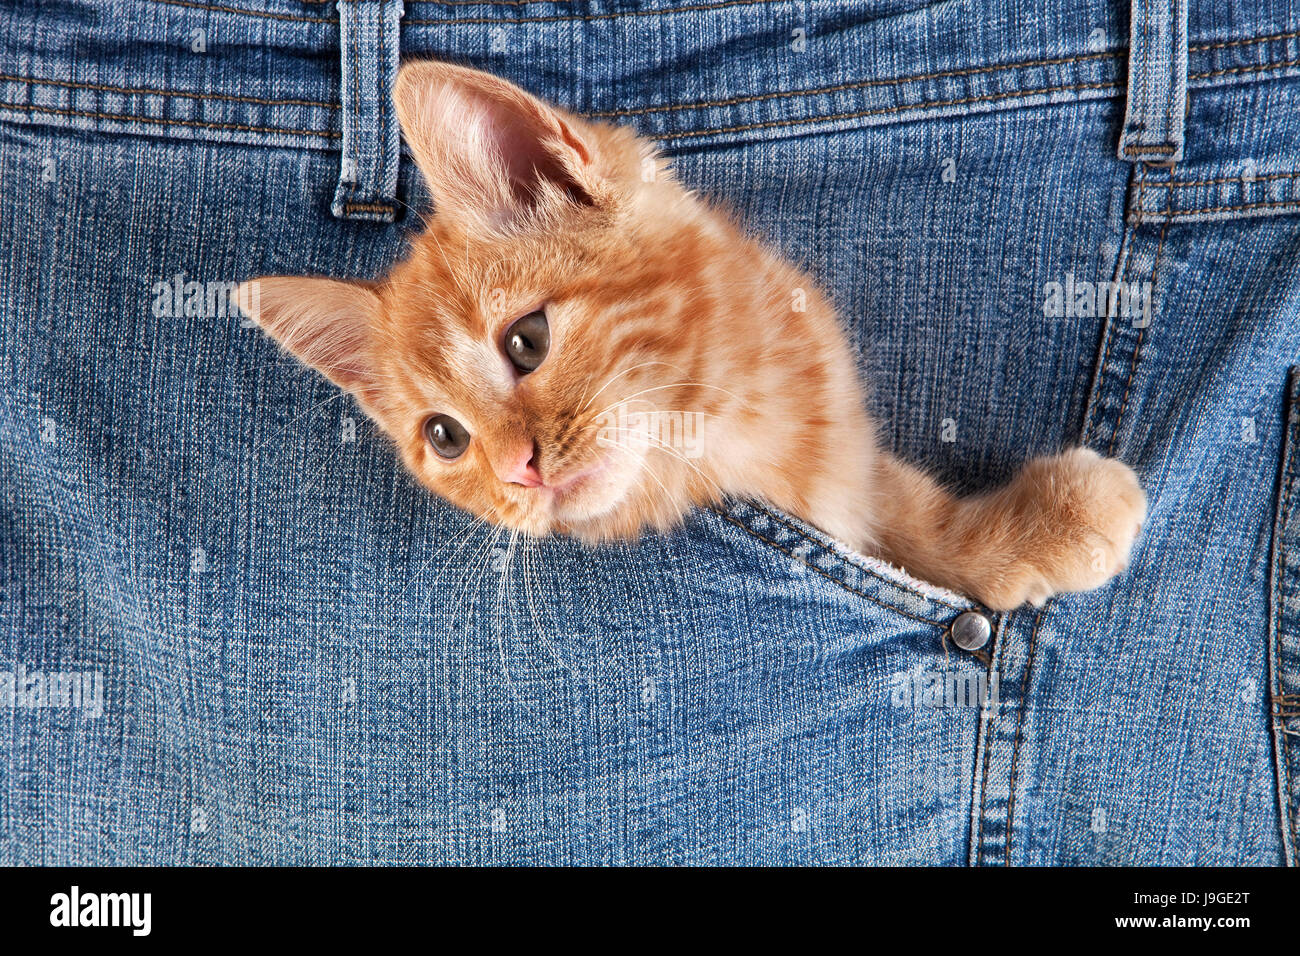 Red Tabby chat domestique, Kitten playing en jeans, poche Banque D'Images